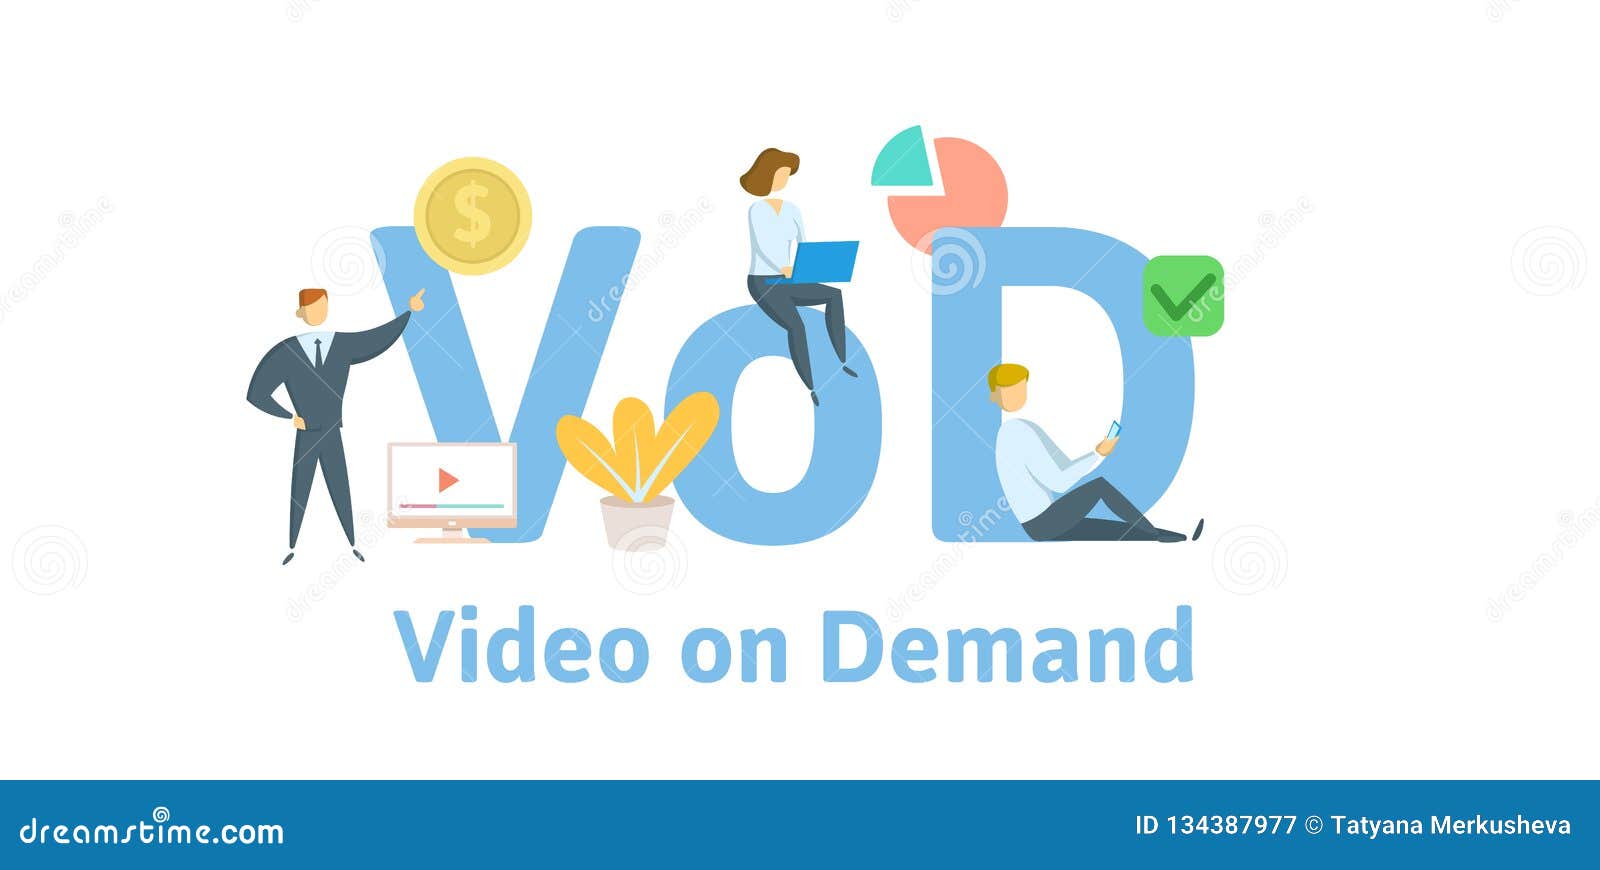 VOD, Video on Demand. Concept with Keywords, Letters, and Icons. Flat Vector Illustration